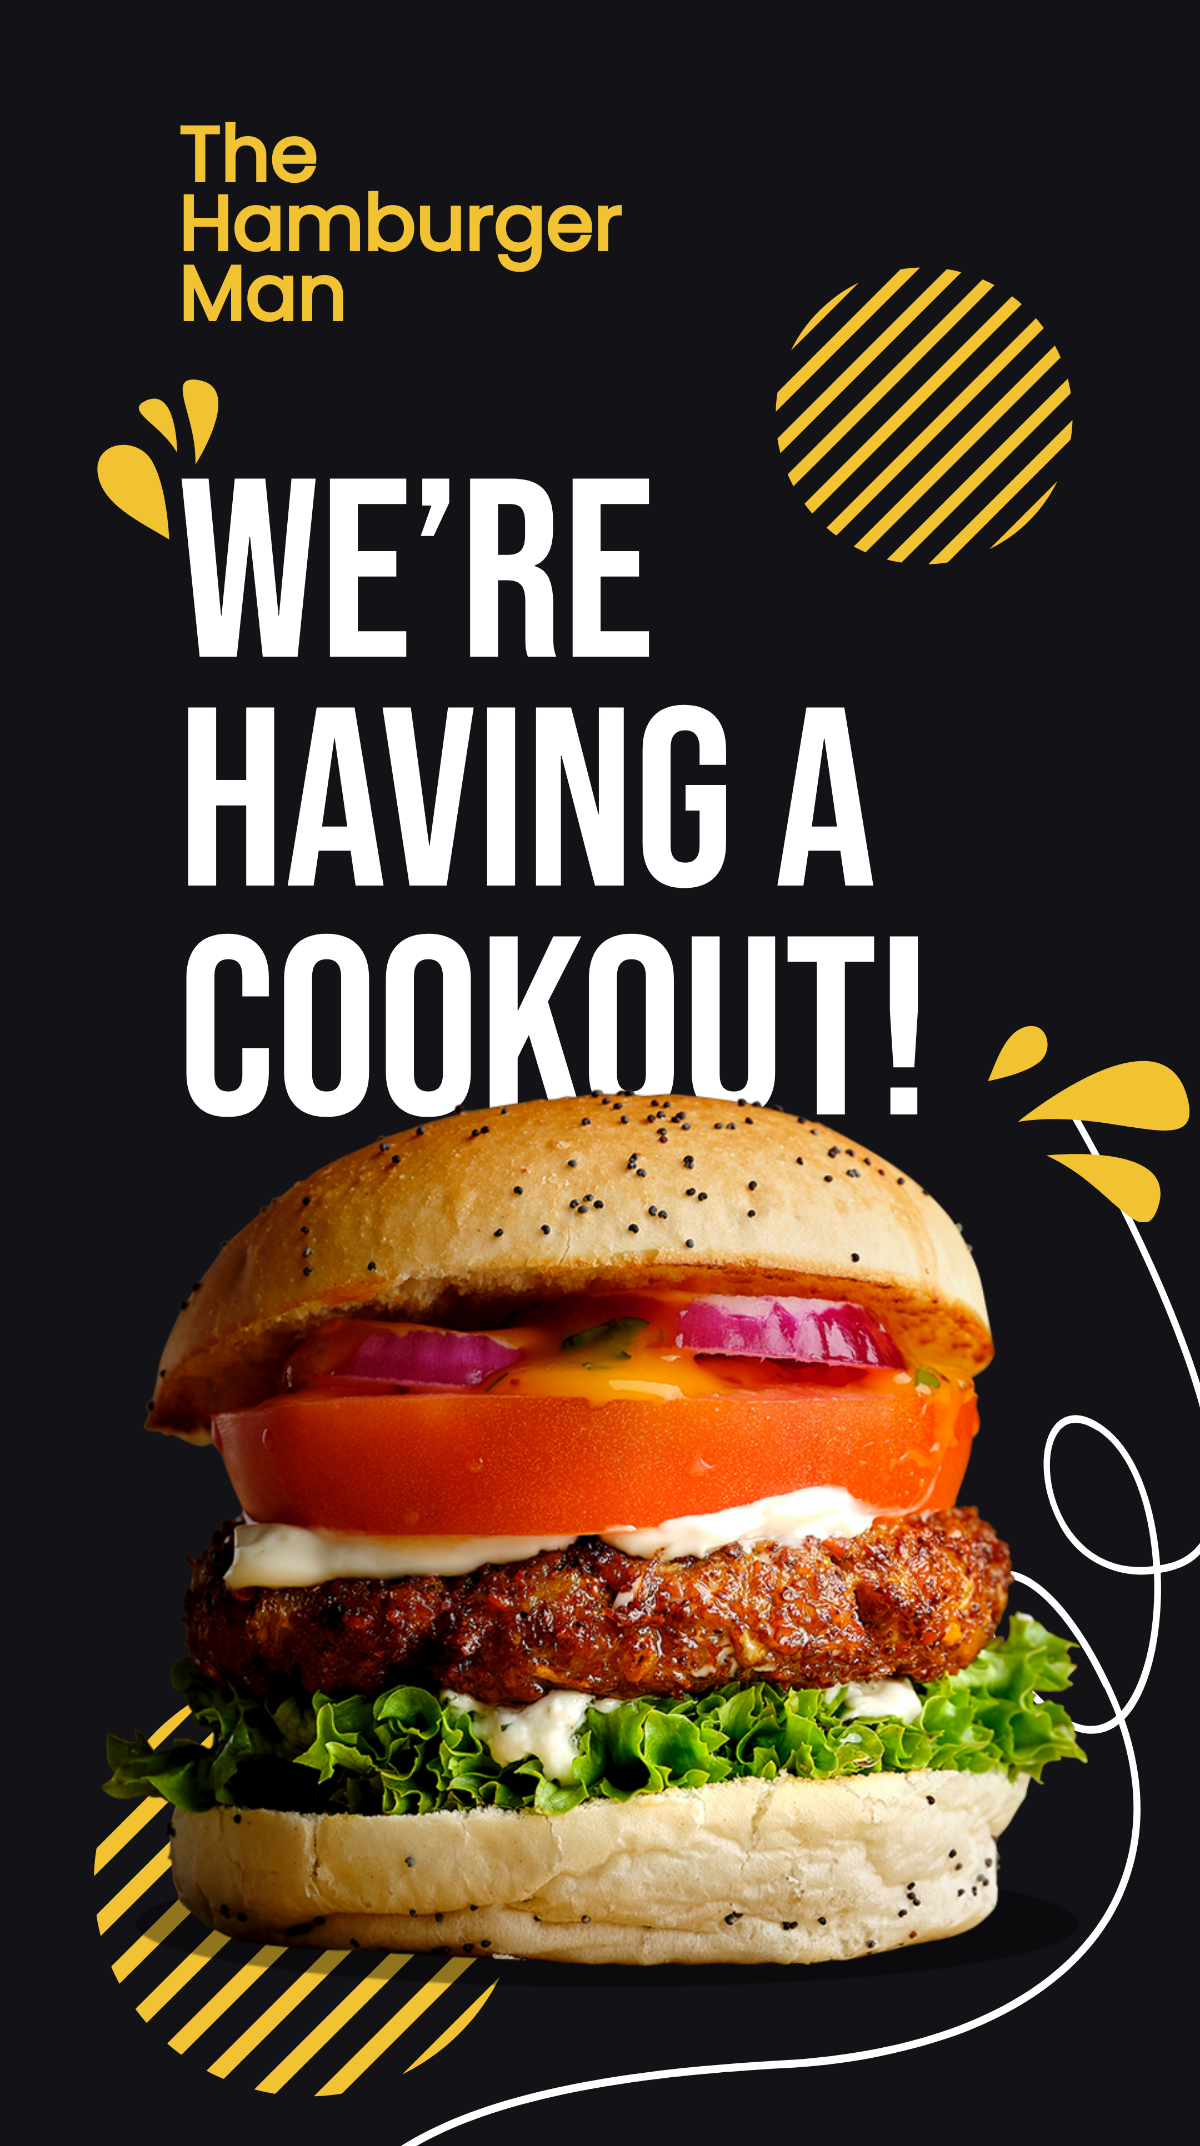 Free Cookout Invitation Whatsapp Post Template